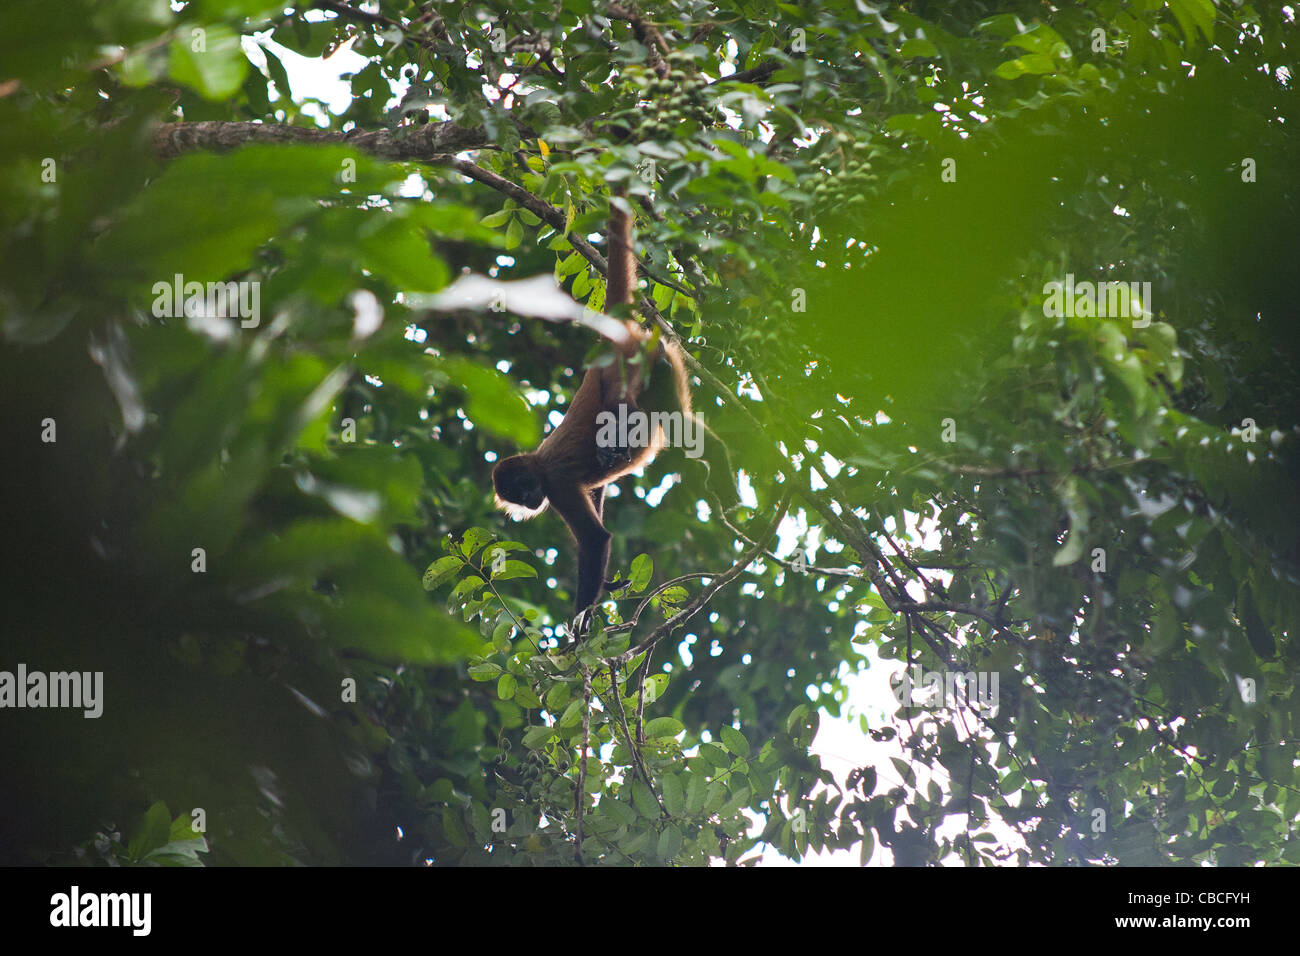 A geoffroy's spider monkey (Ateles geoffroyi) hangs from a tree by its tail in Tortuguero National Park, Costa Rica Stock Photo